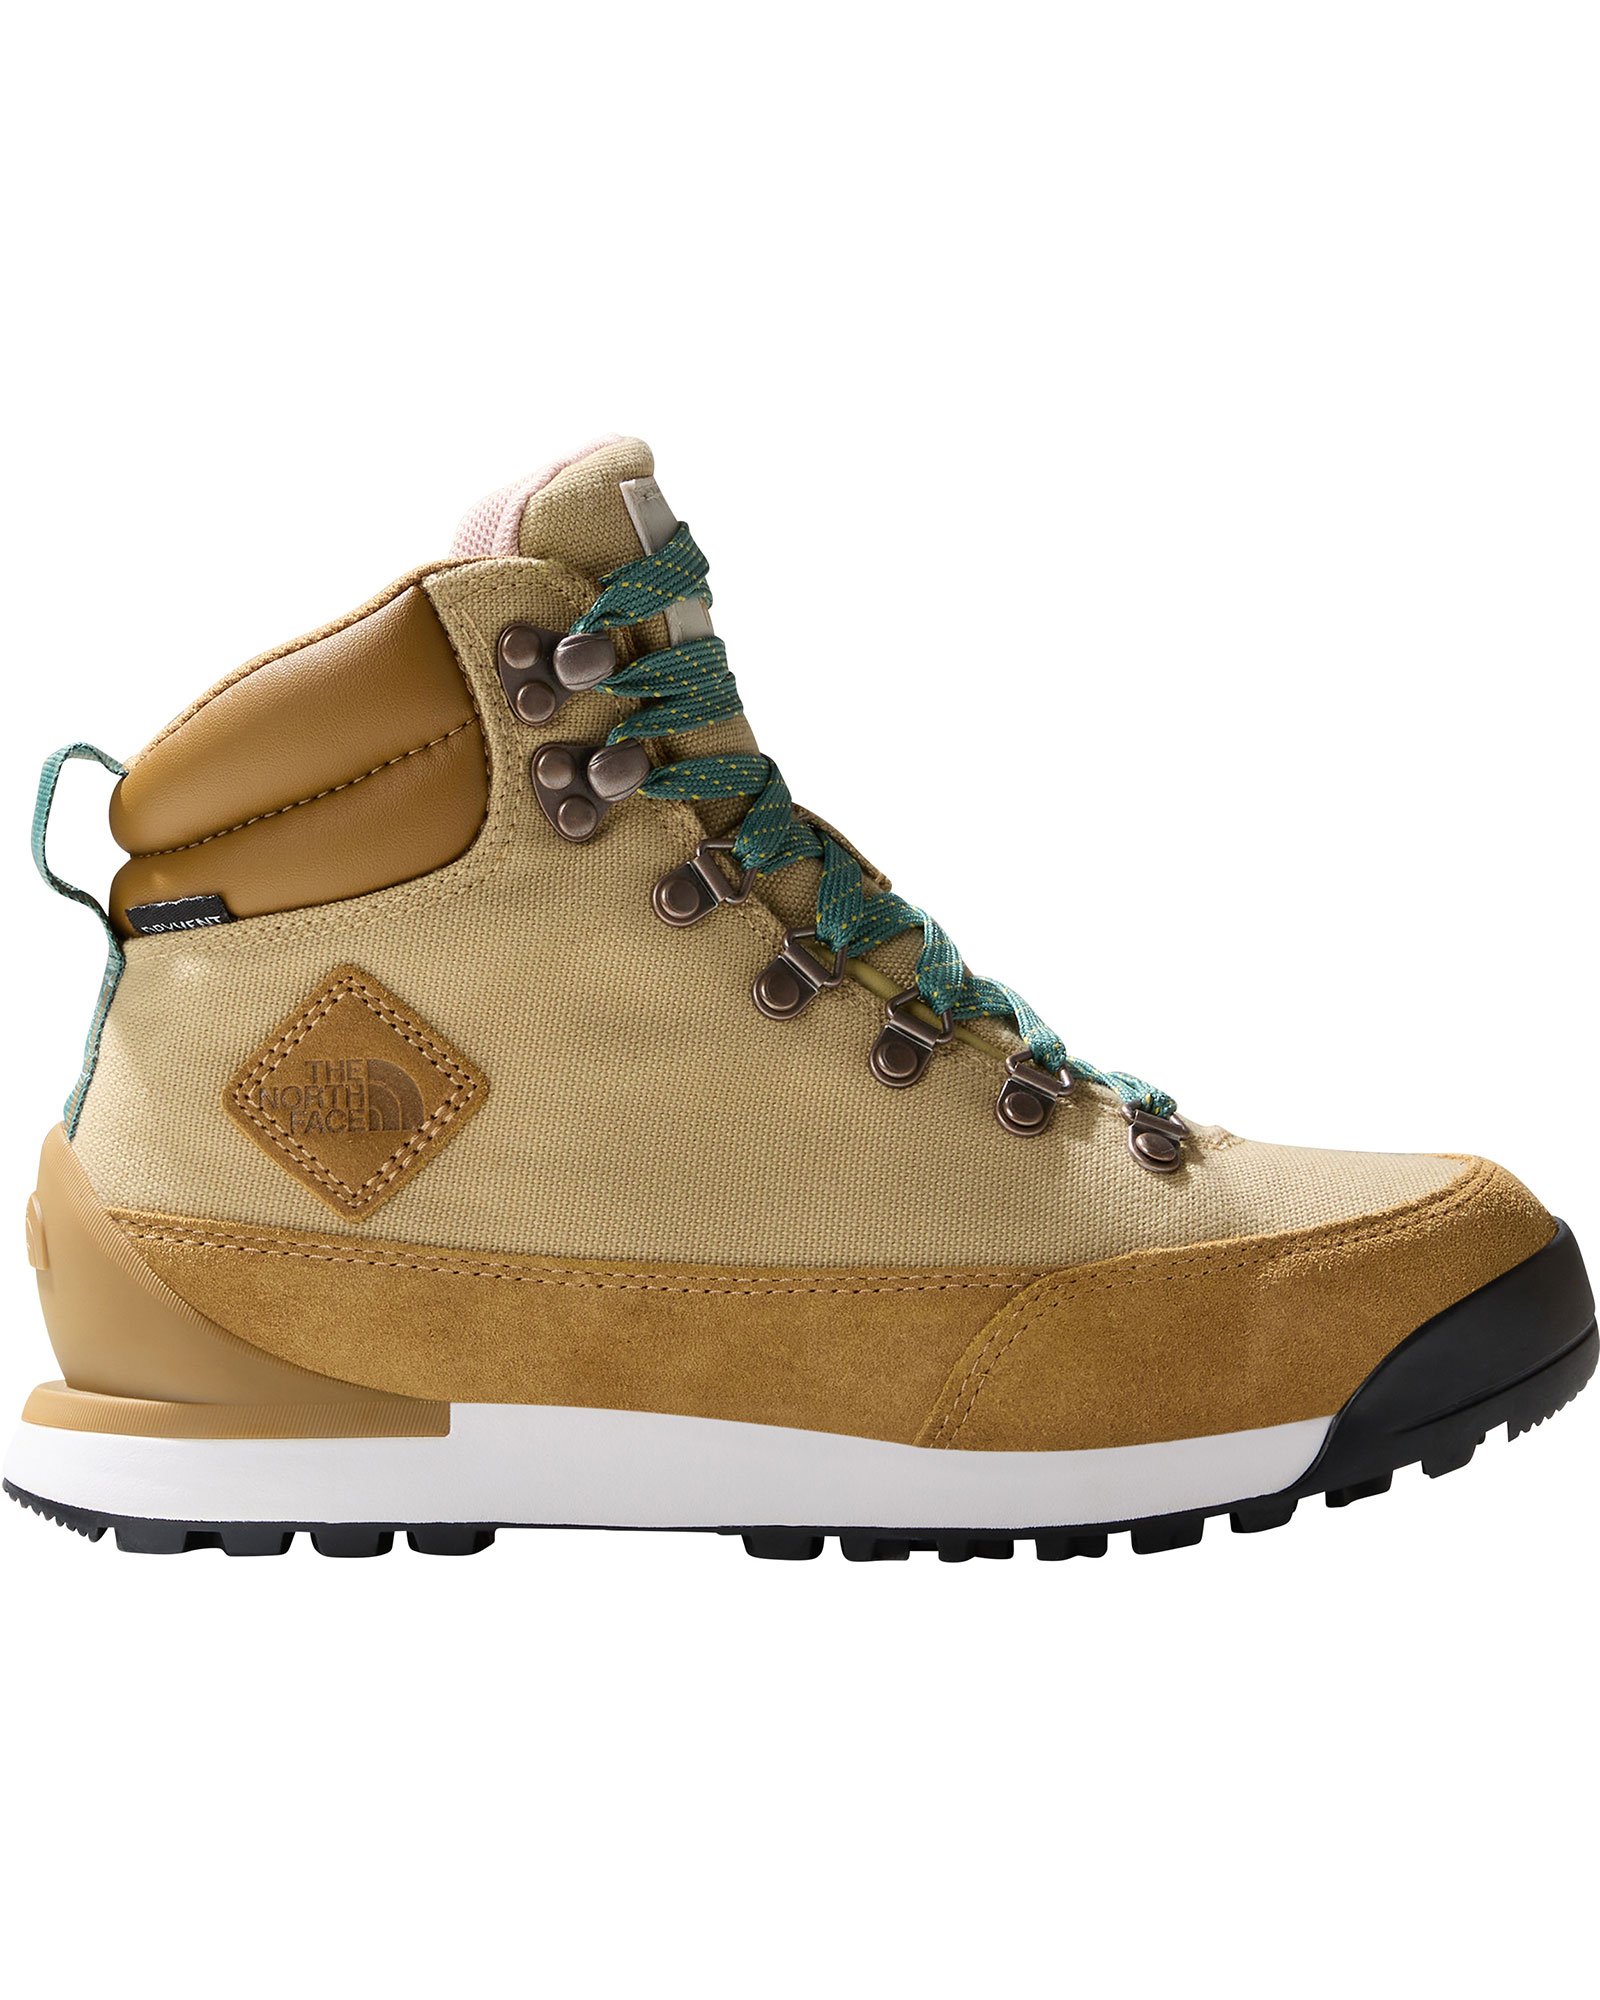 The North Face Back to Berkeley IV Textile Waterproof Women’s Boots - Khaki Stone/Utility Brown UK 8